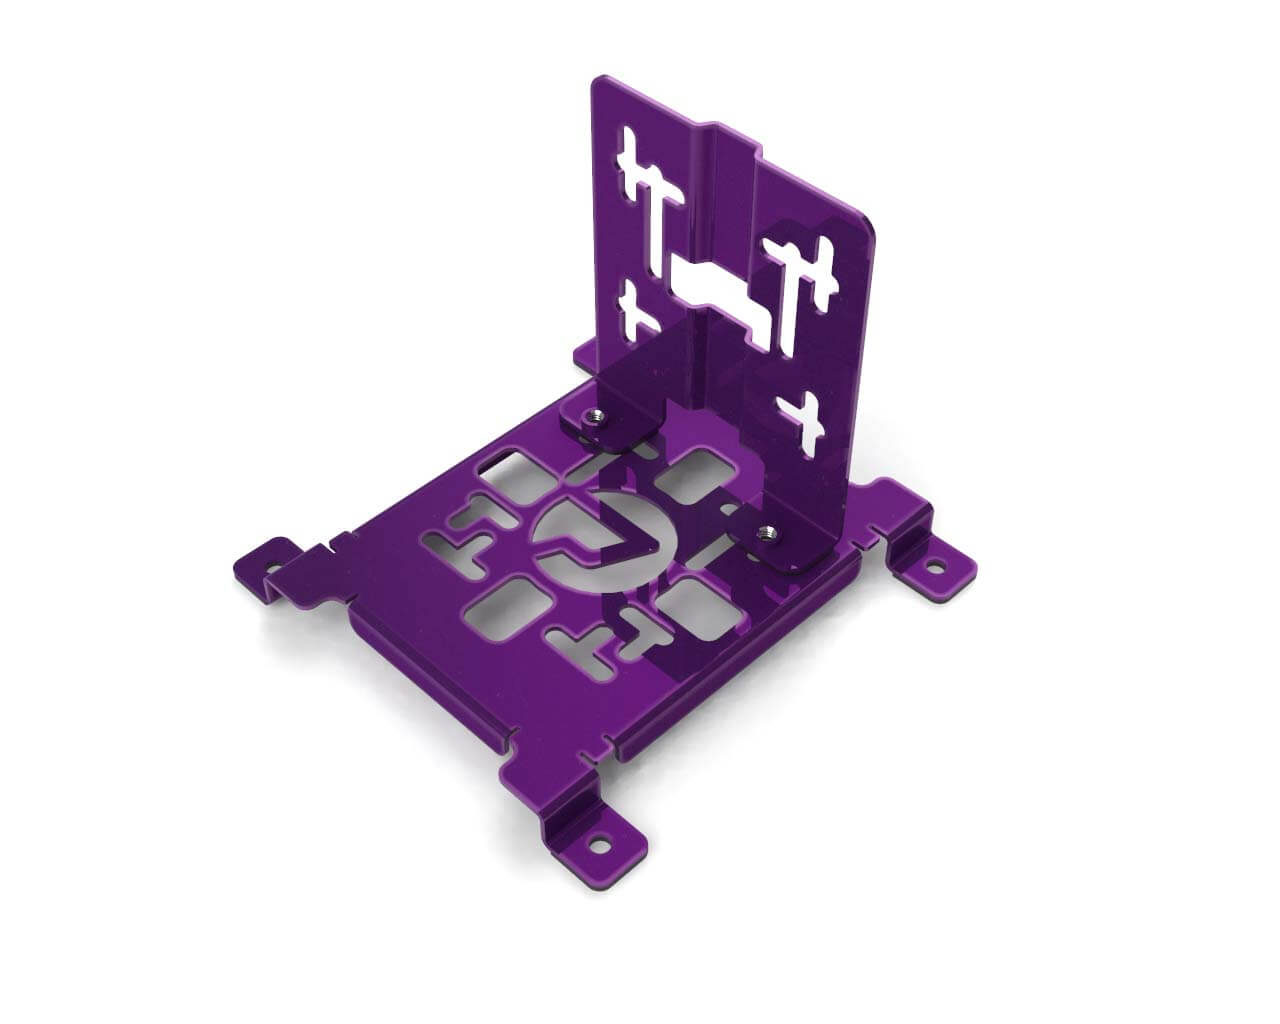 PrimoChill SX Universal Spider Mount Bracket Kit - 120mm Series - PrimoChill - KEEPING IT COOL Candy Purple